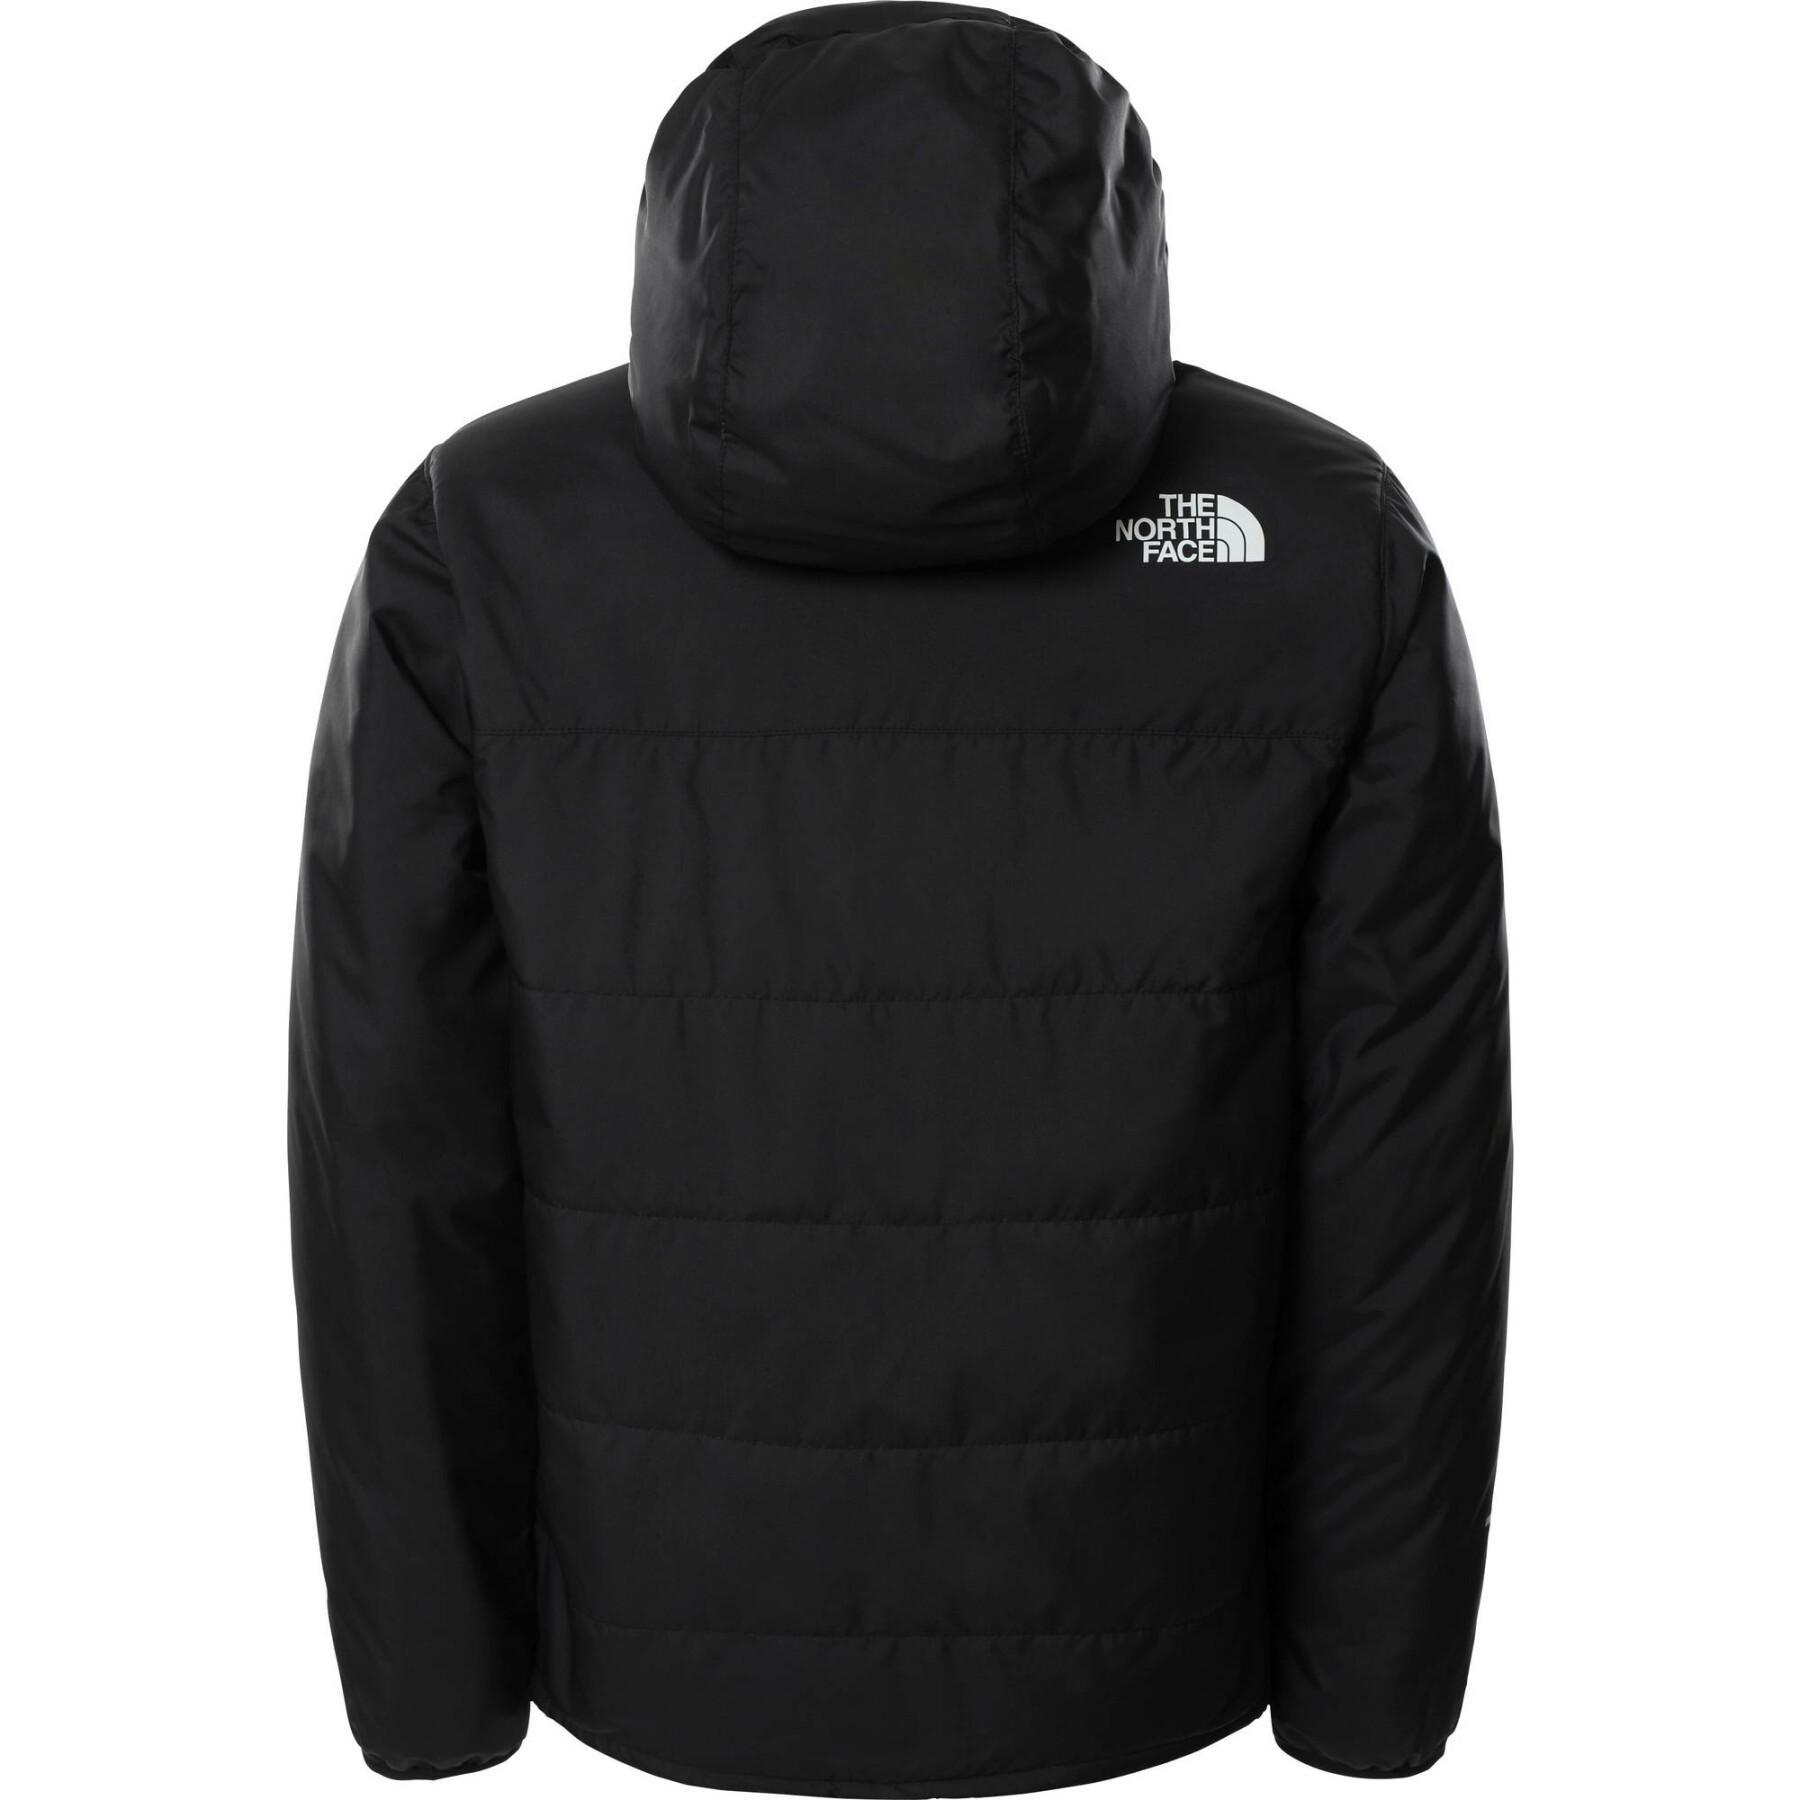 Boy's jacket The North Face Reactor Insulated